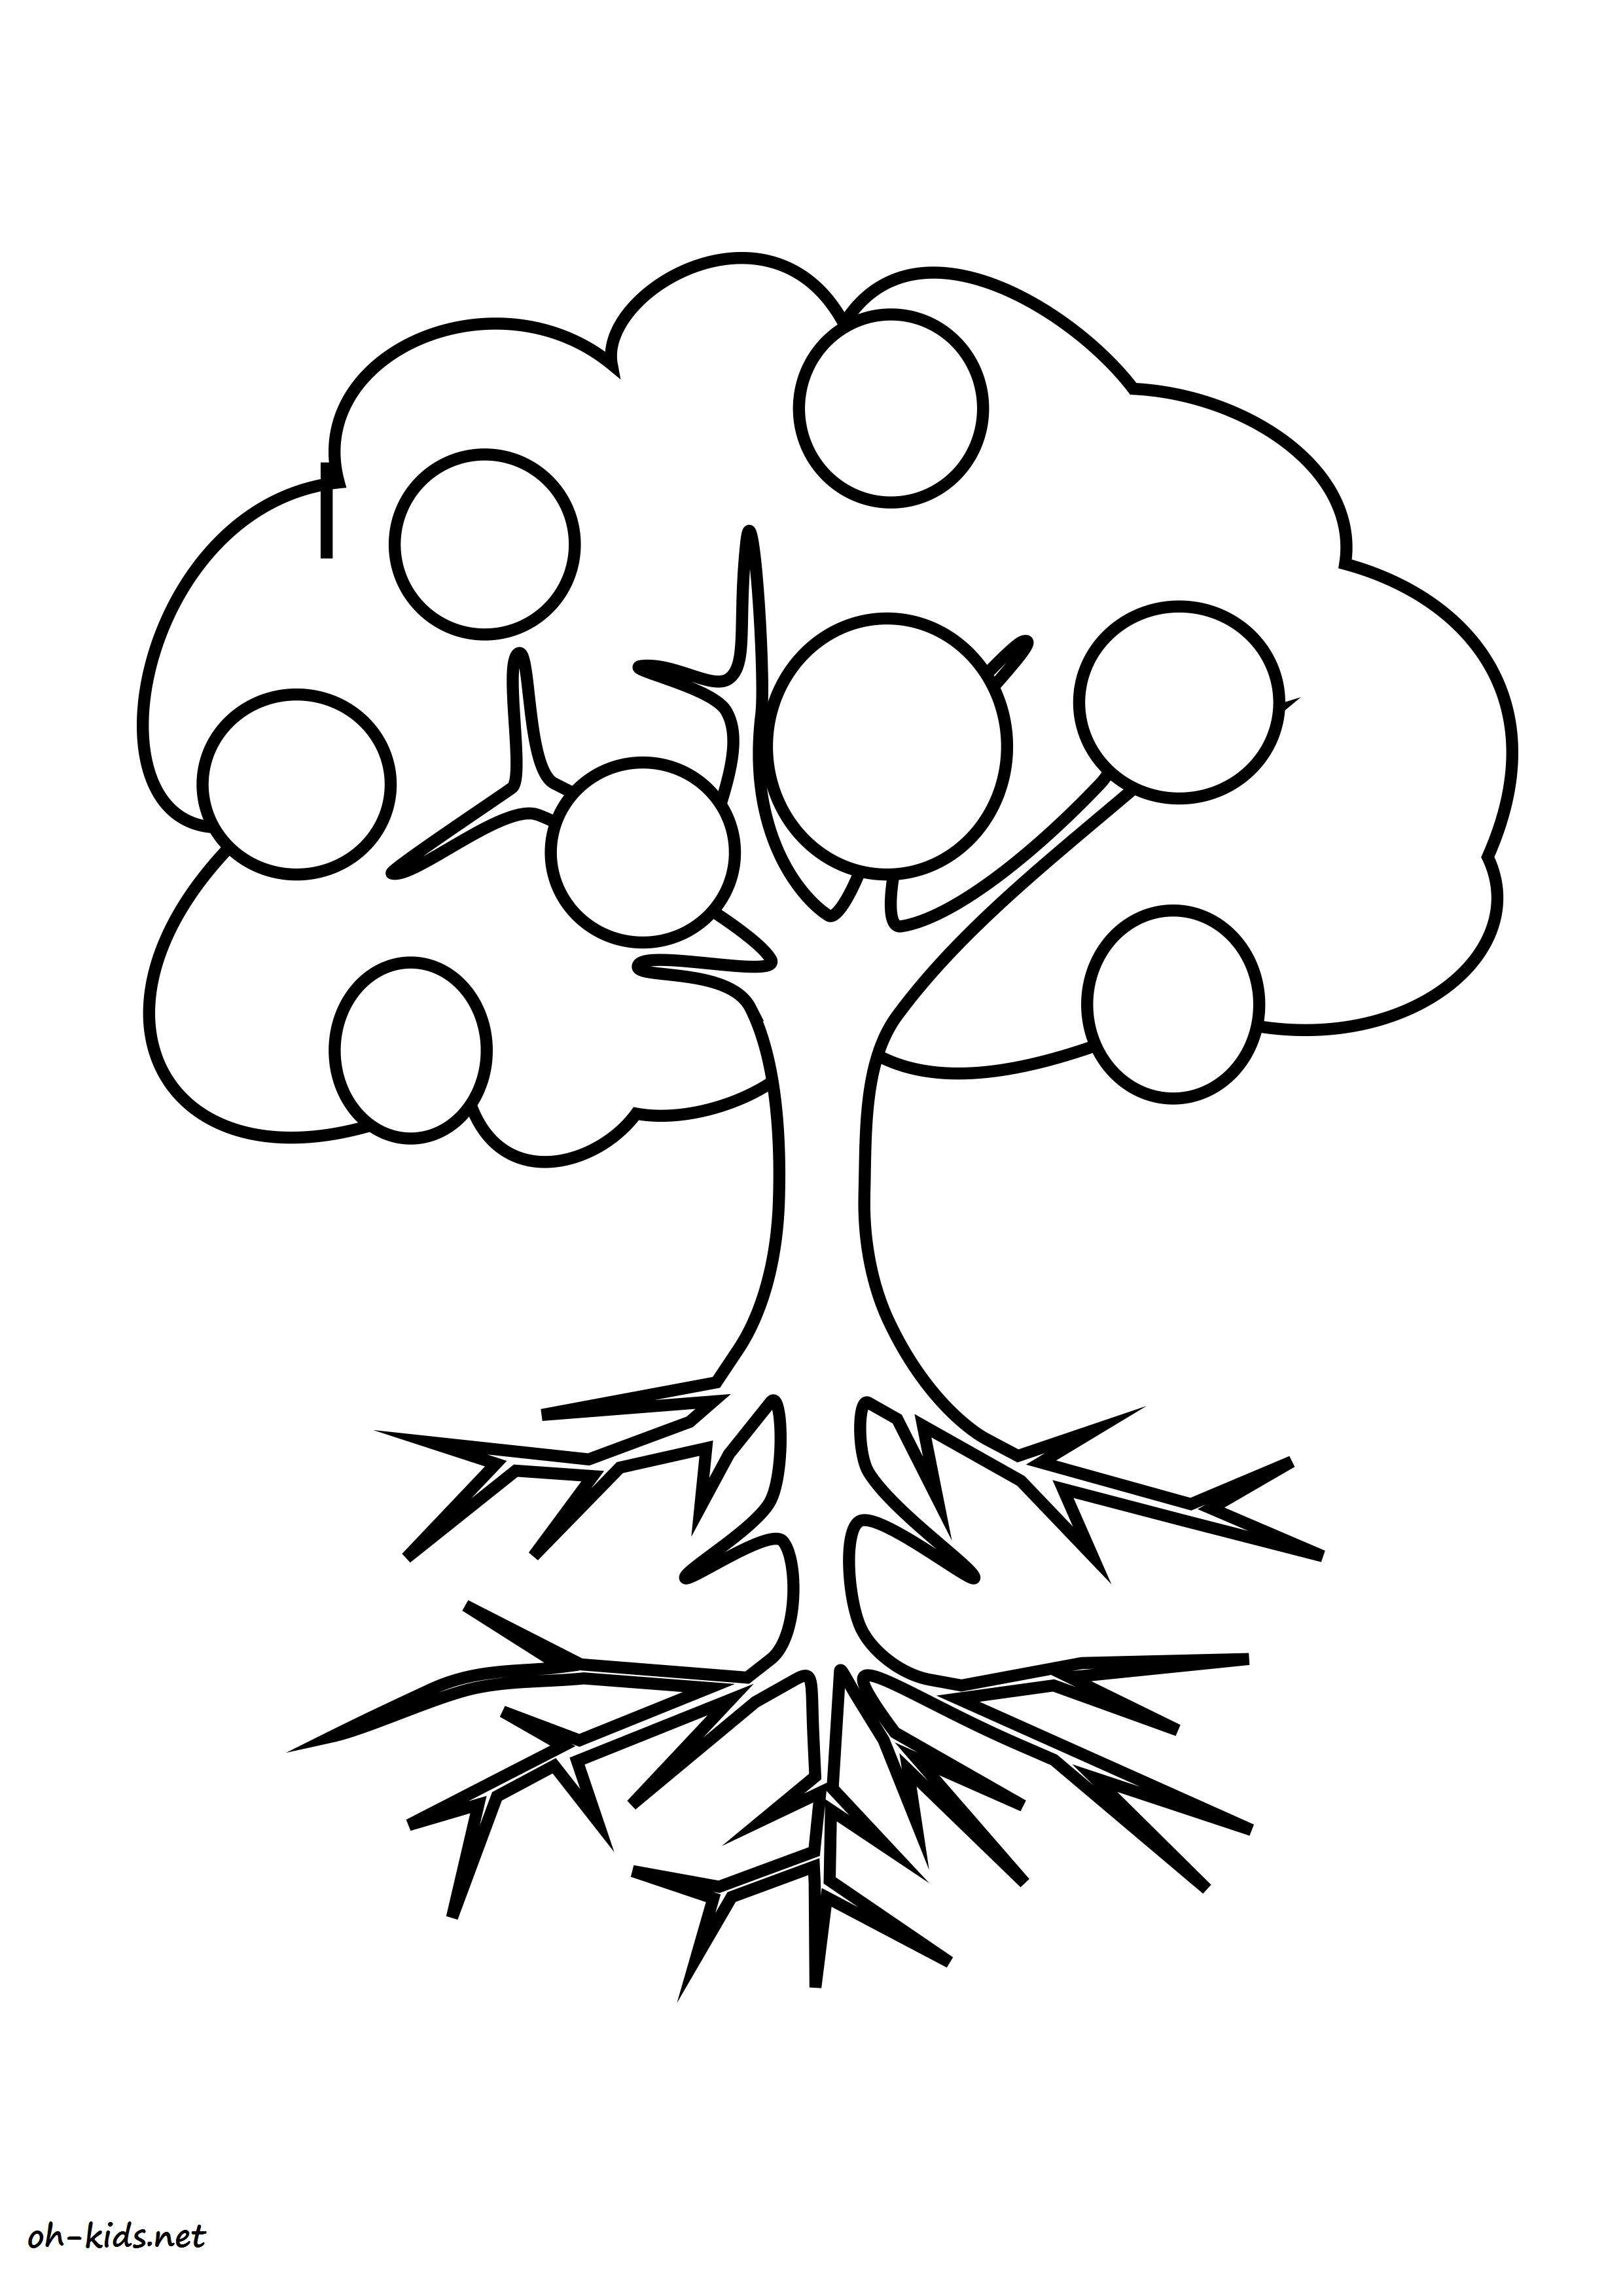 Download Apple tree #163546 (Nature) - Printable coloring pages